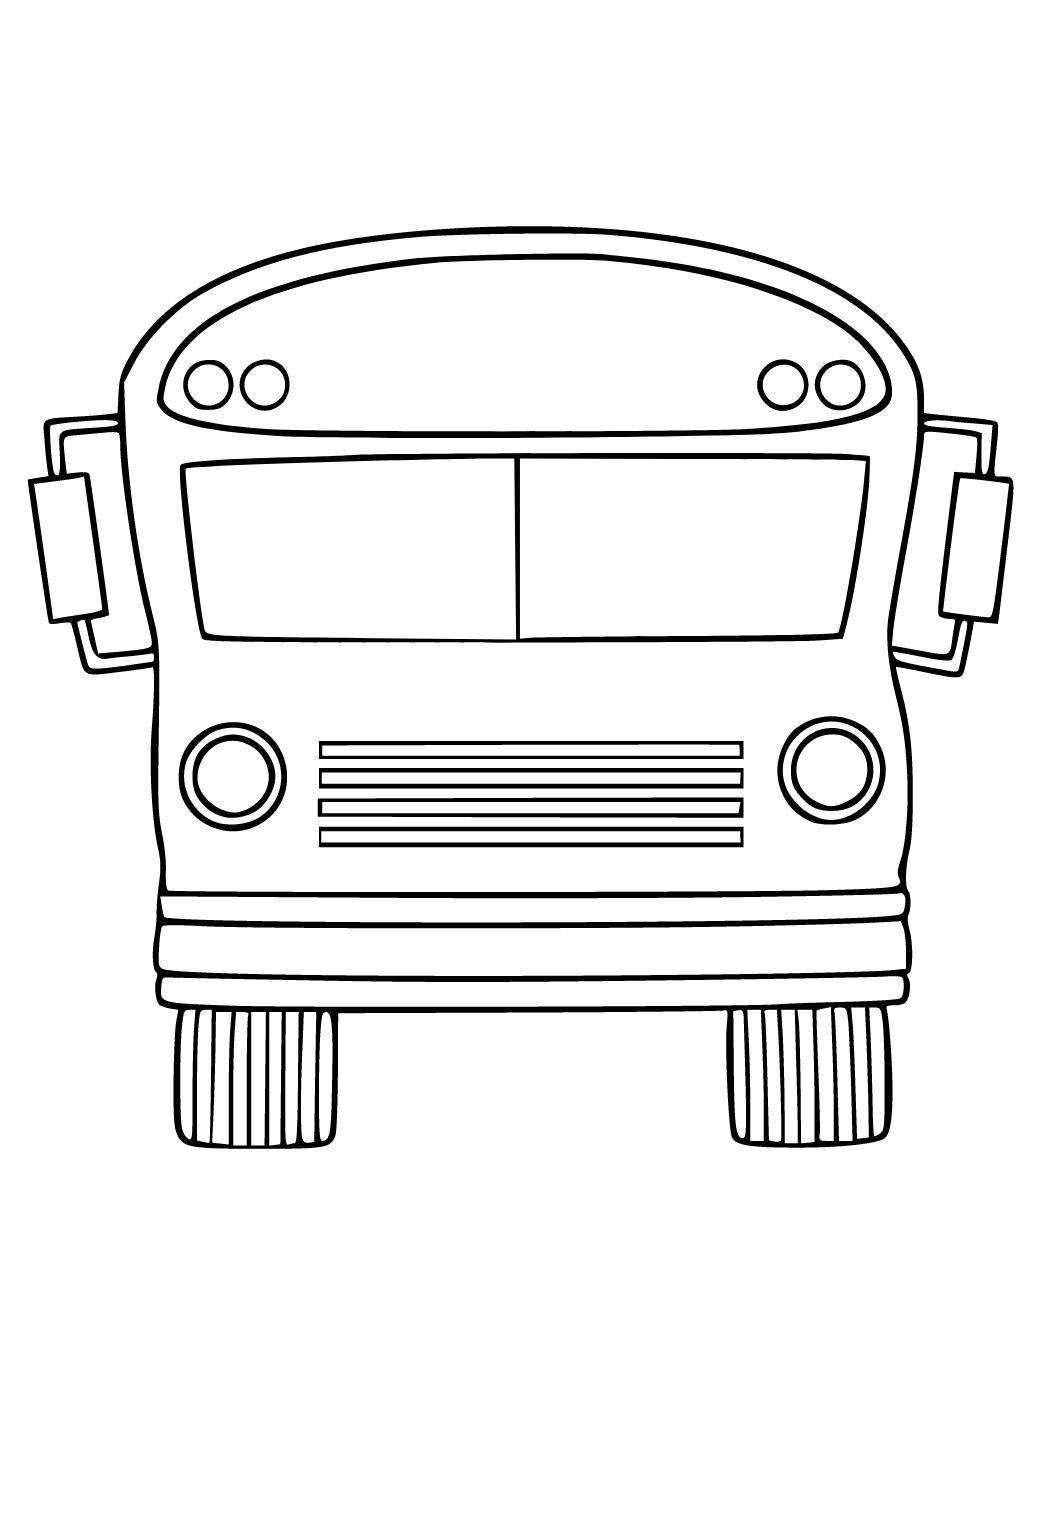 Free printable schoolbus easy coloring page for adults and kids